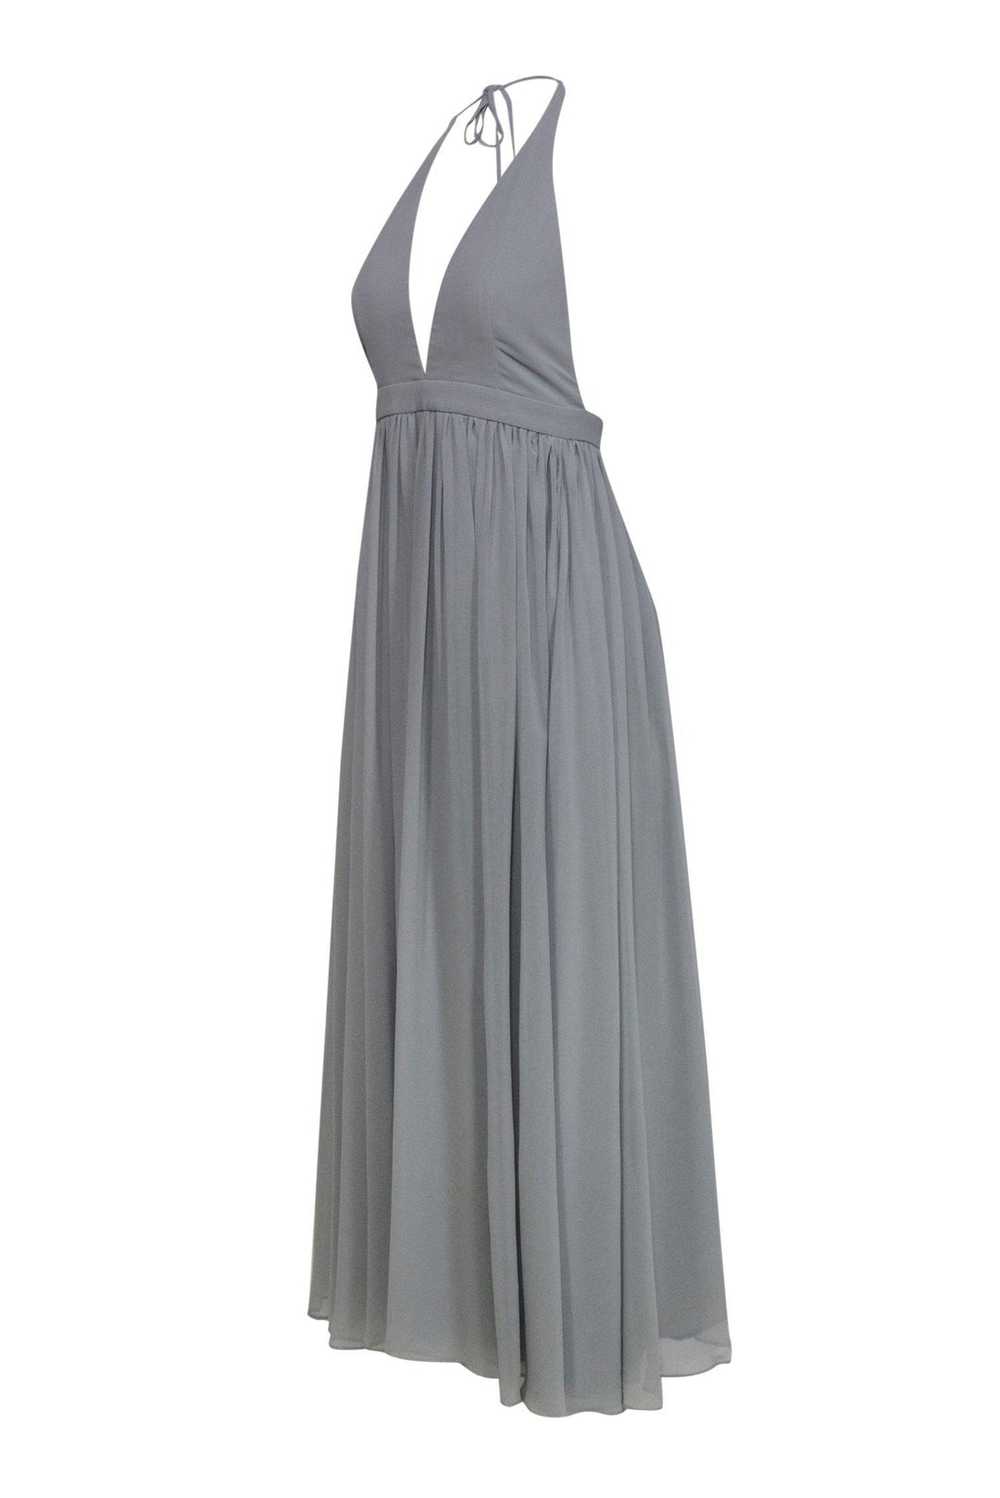 Fame and Partners - Light Grey Halter Gown w/ Mes… - image 2